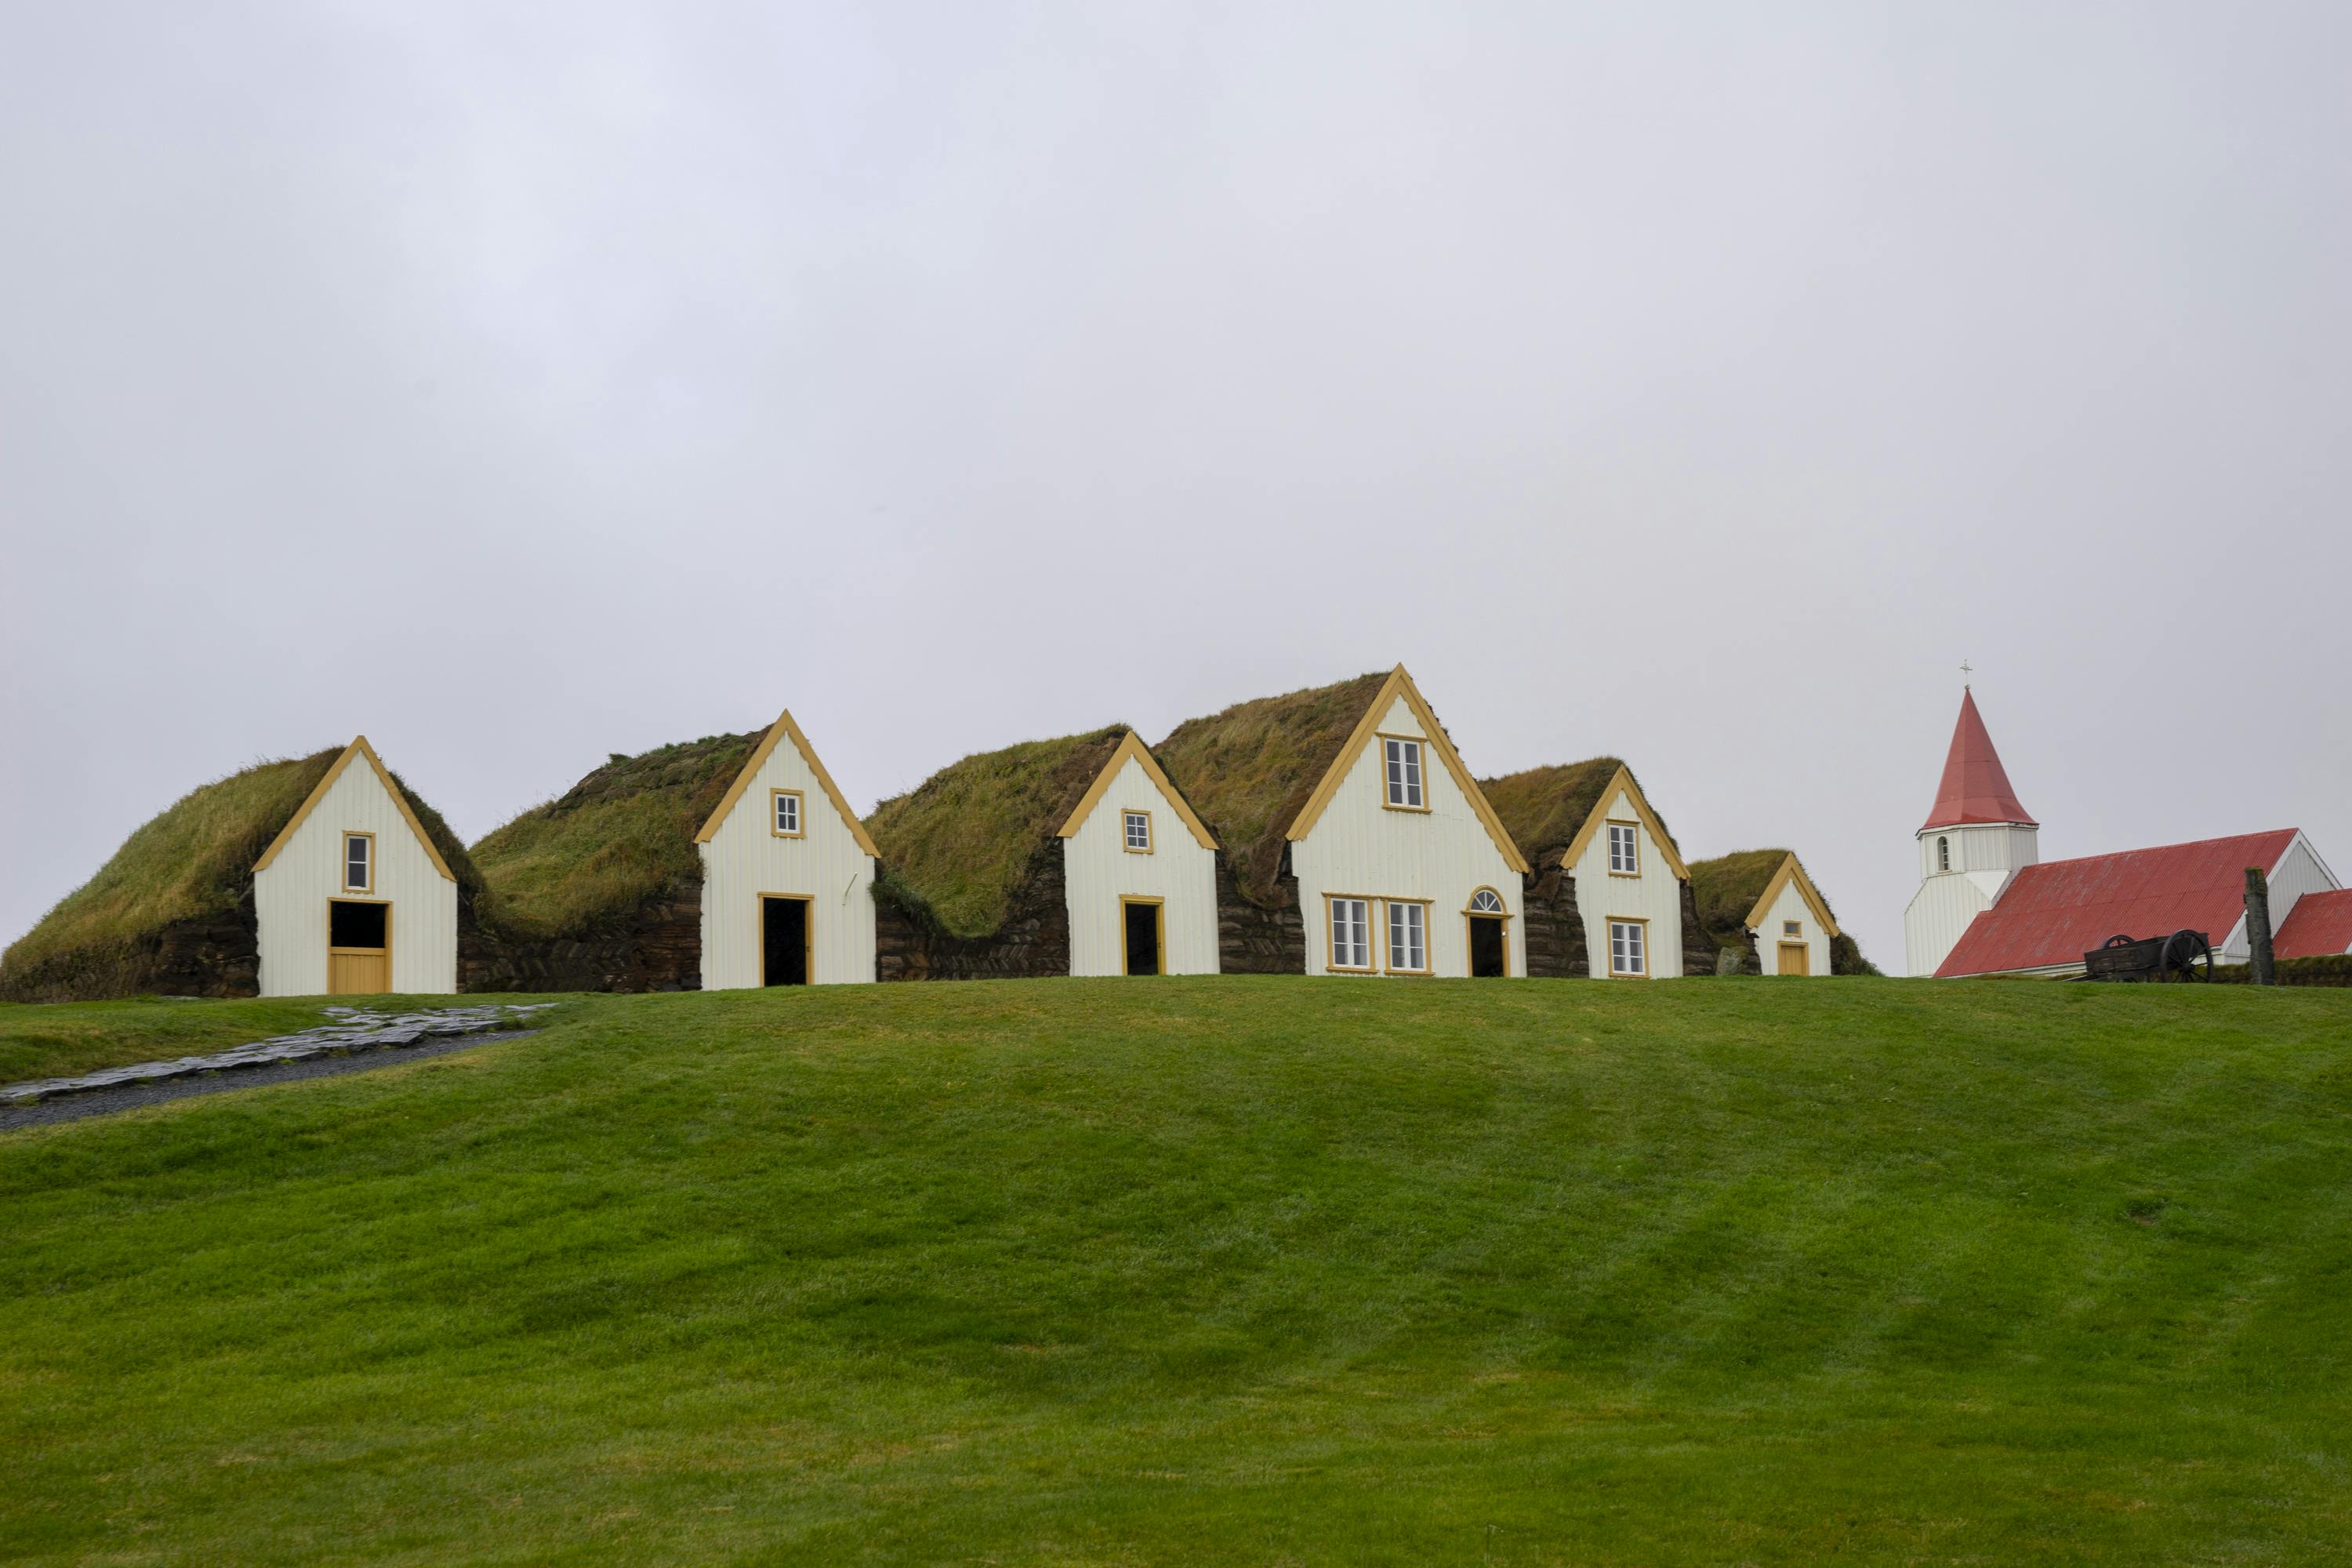 Sod houses with a wooden front